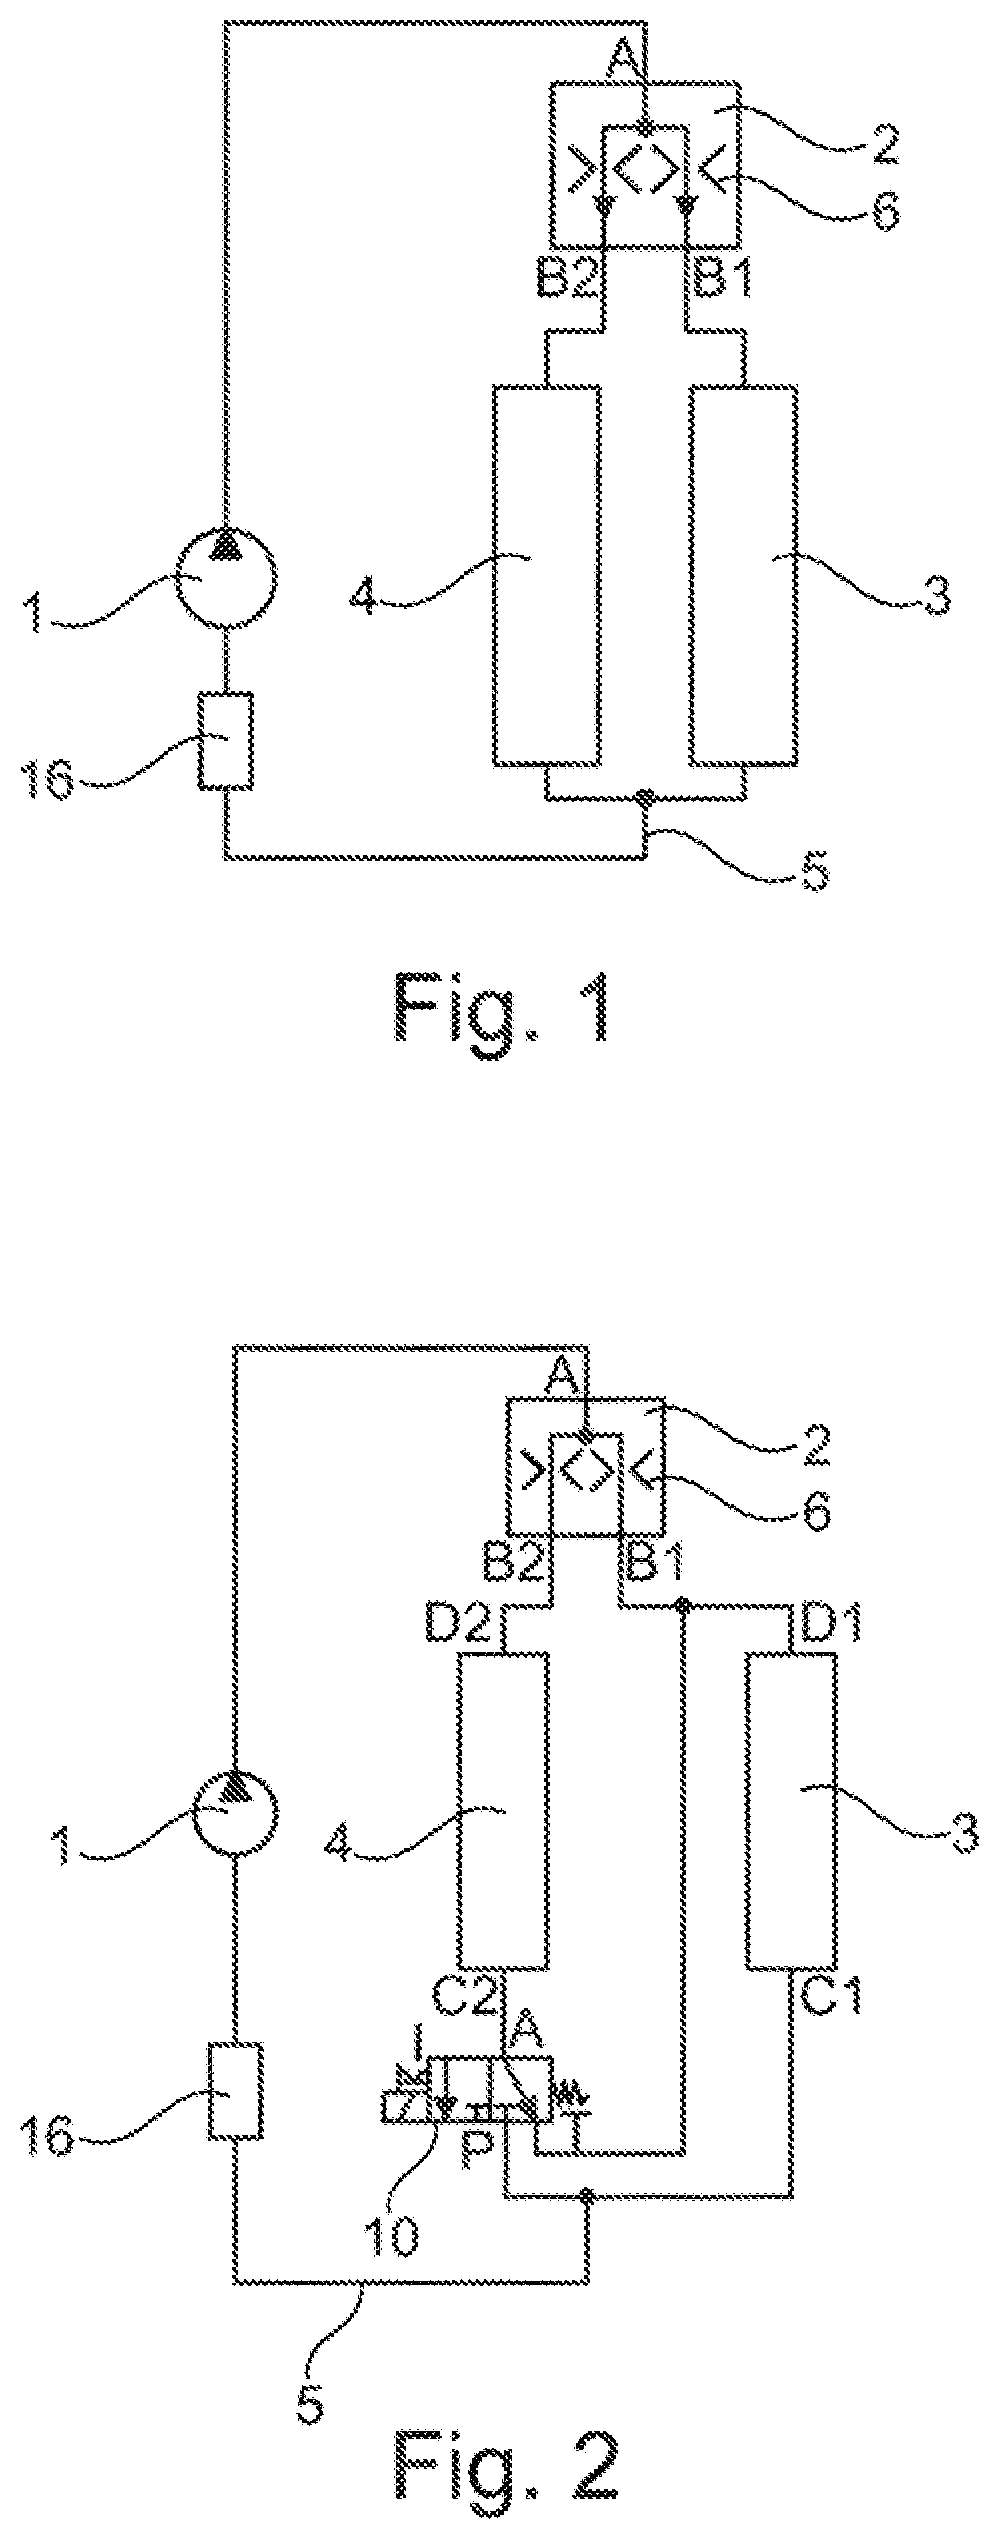 Thermal management system for an electric drive system, preferably for a vehicle